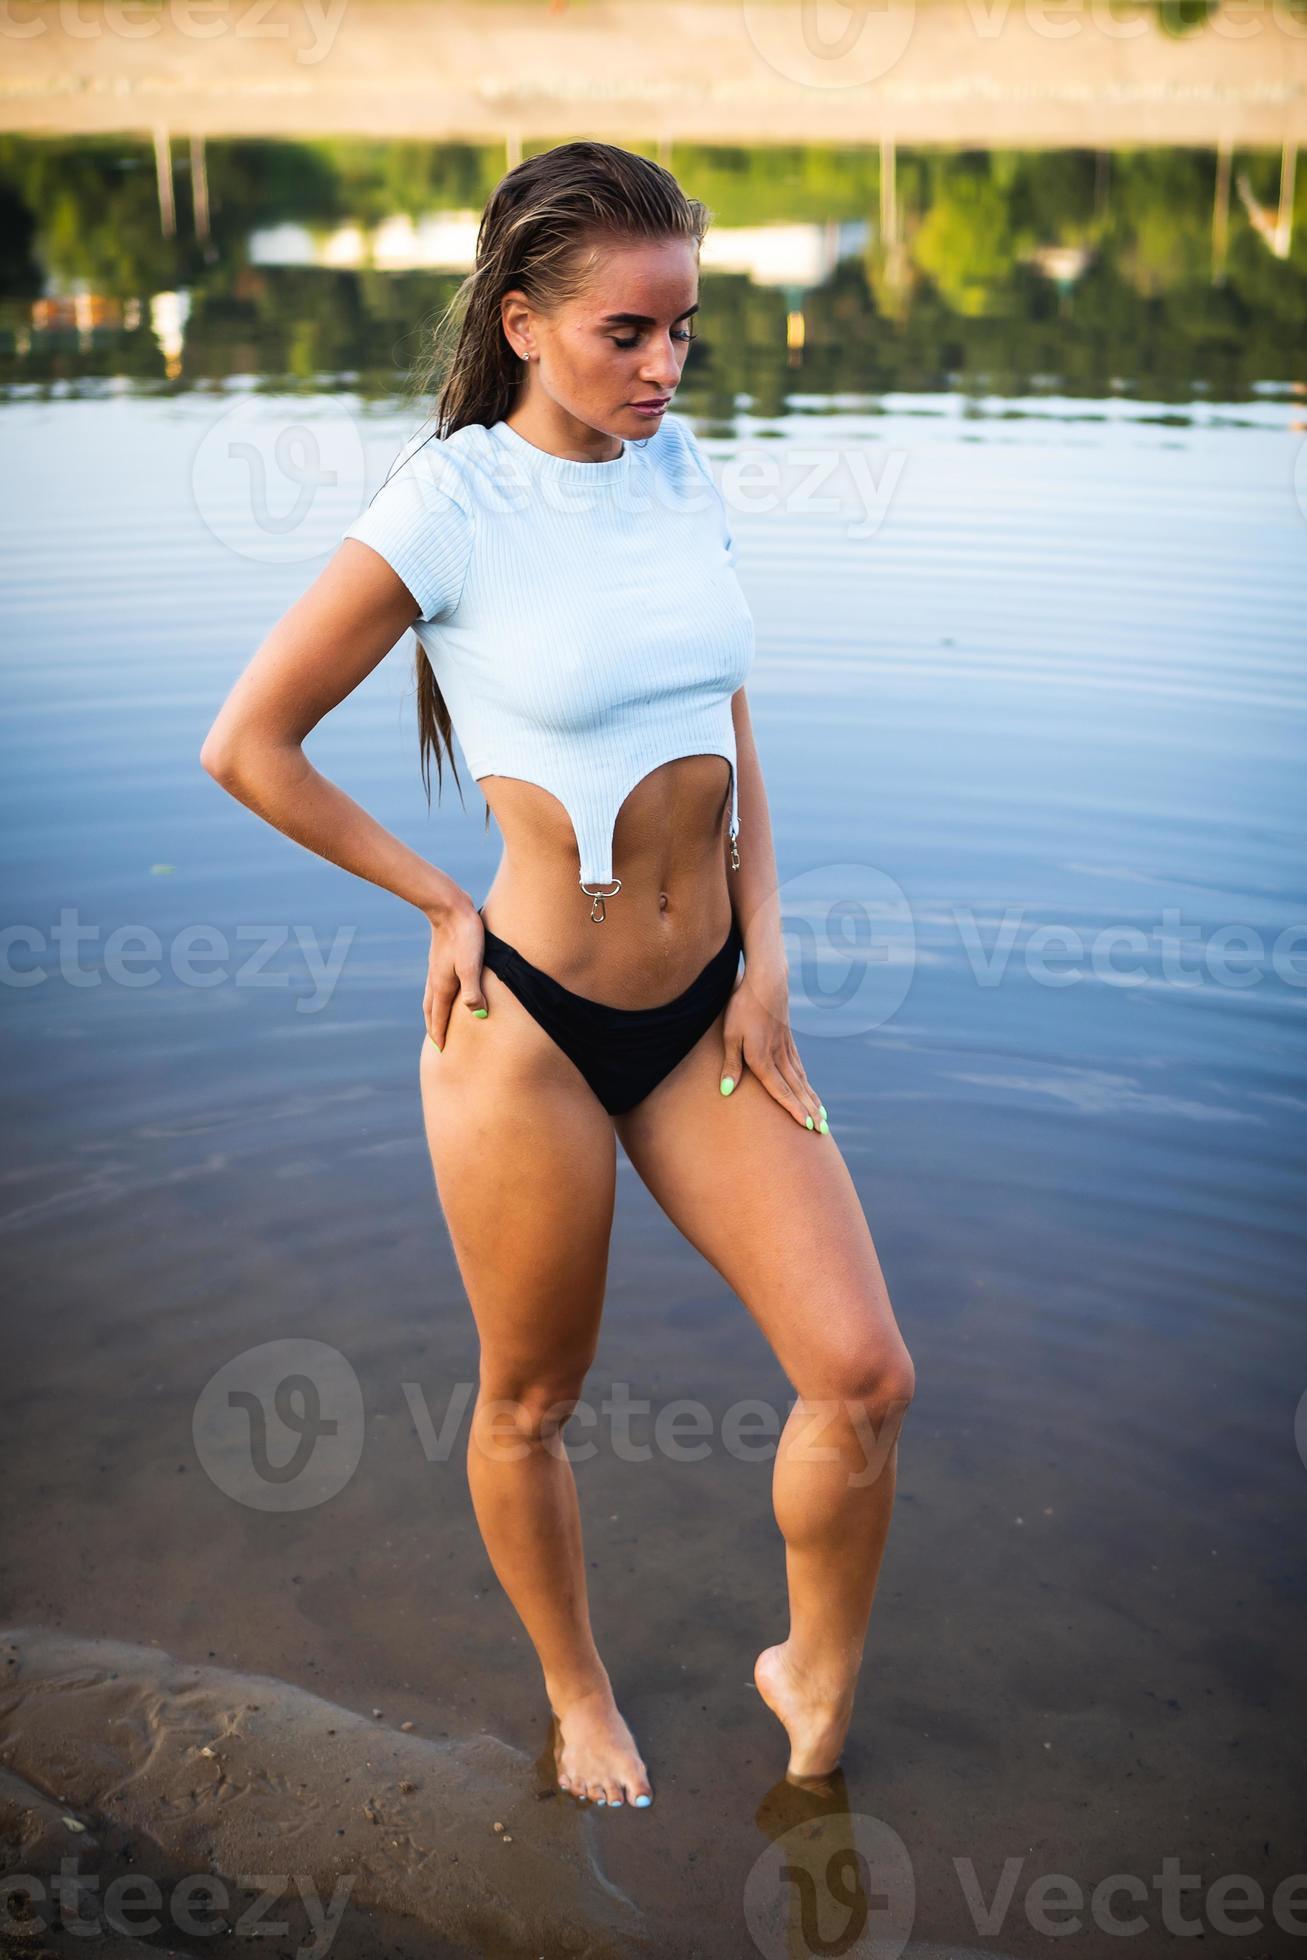 https://static.vecteezy.com/system/resources/previews/007/116/306/large_2x/a-beautiful-brunette-model-in-black-panties-and-a-t-shirt-posing-in-the-water-in-front-of-the-camera-photo.jpg